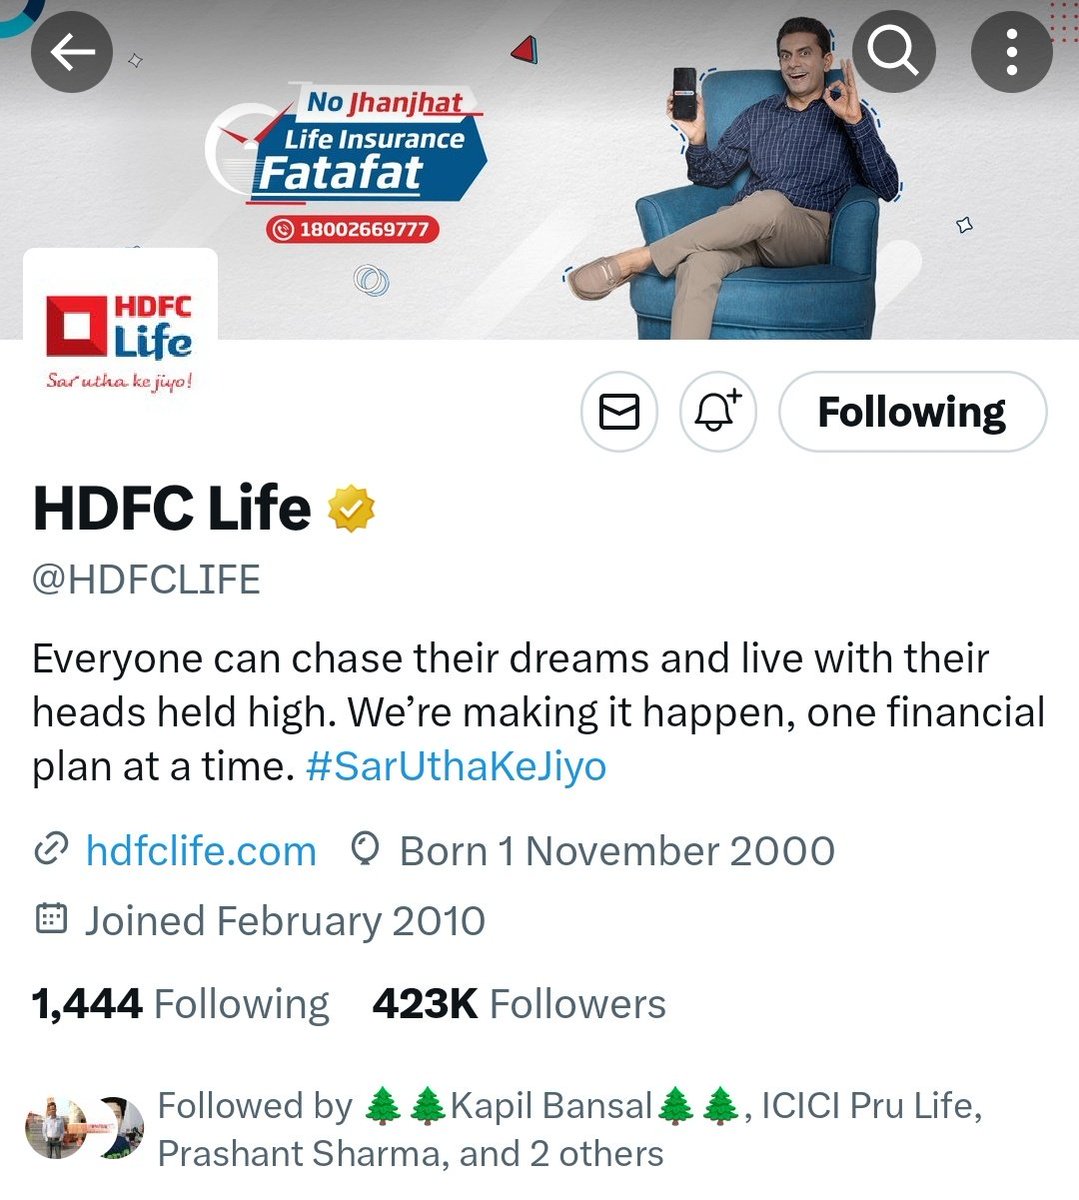 @HDFCLIFE Secure your future in a few clicks 

#NoJhanjhatLifeInsuranceFatafat #HDFCLife 
@HDFCLIFE

Join in @Anandhan_KP @Karuphaswami @SenthilRaajaPK